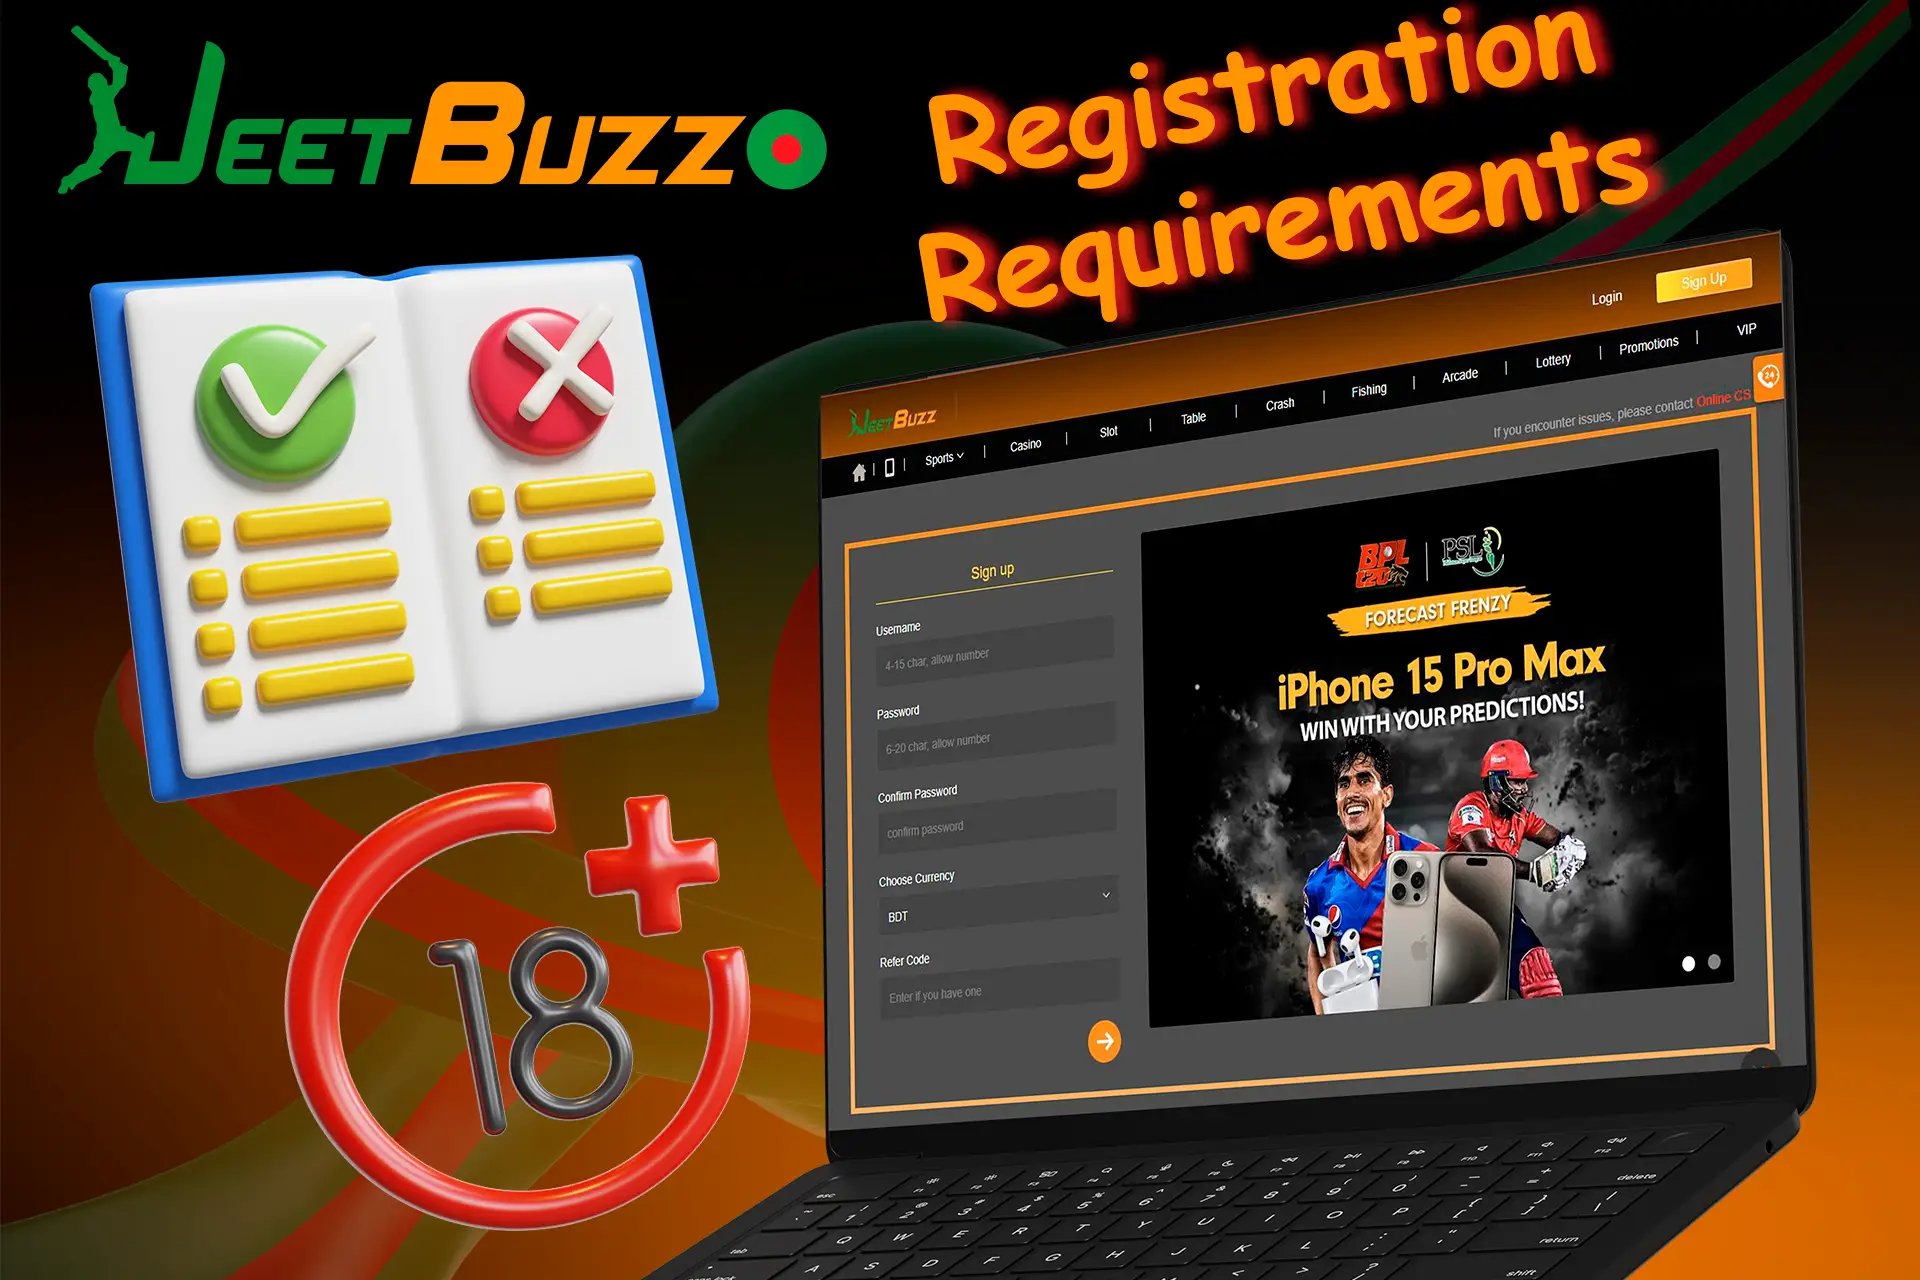 list of requirements for registering a new account